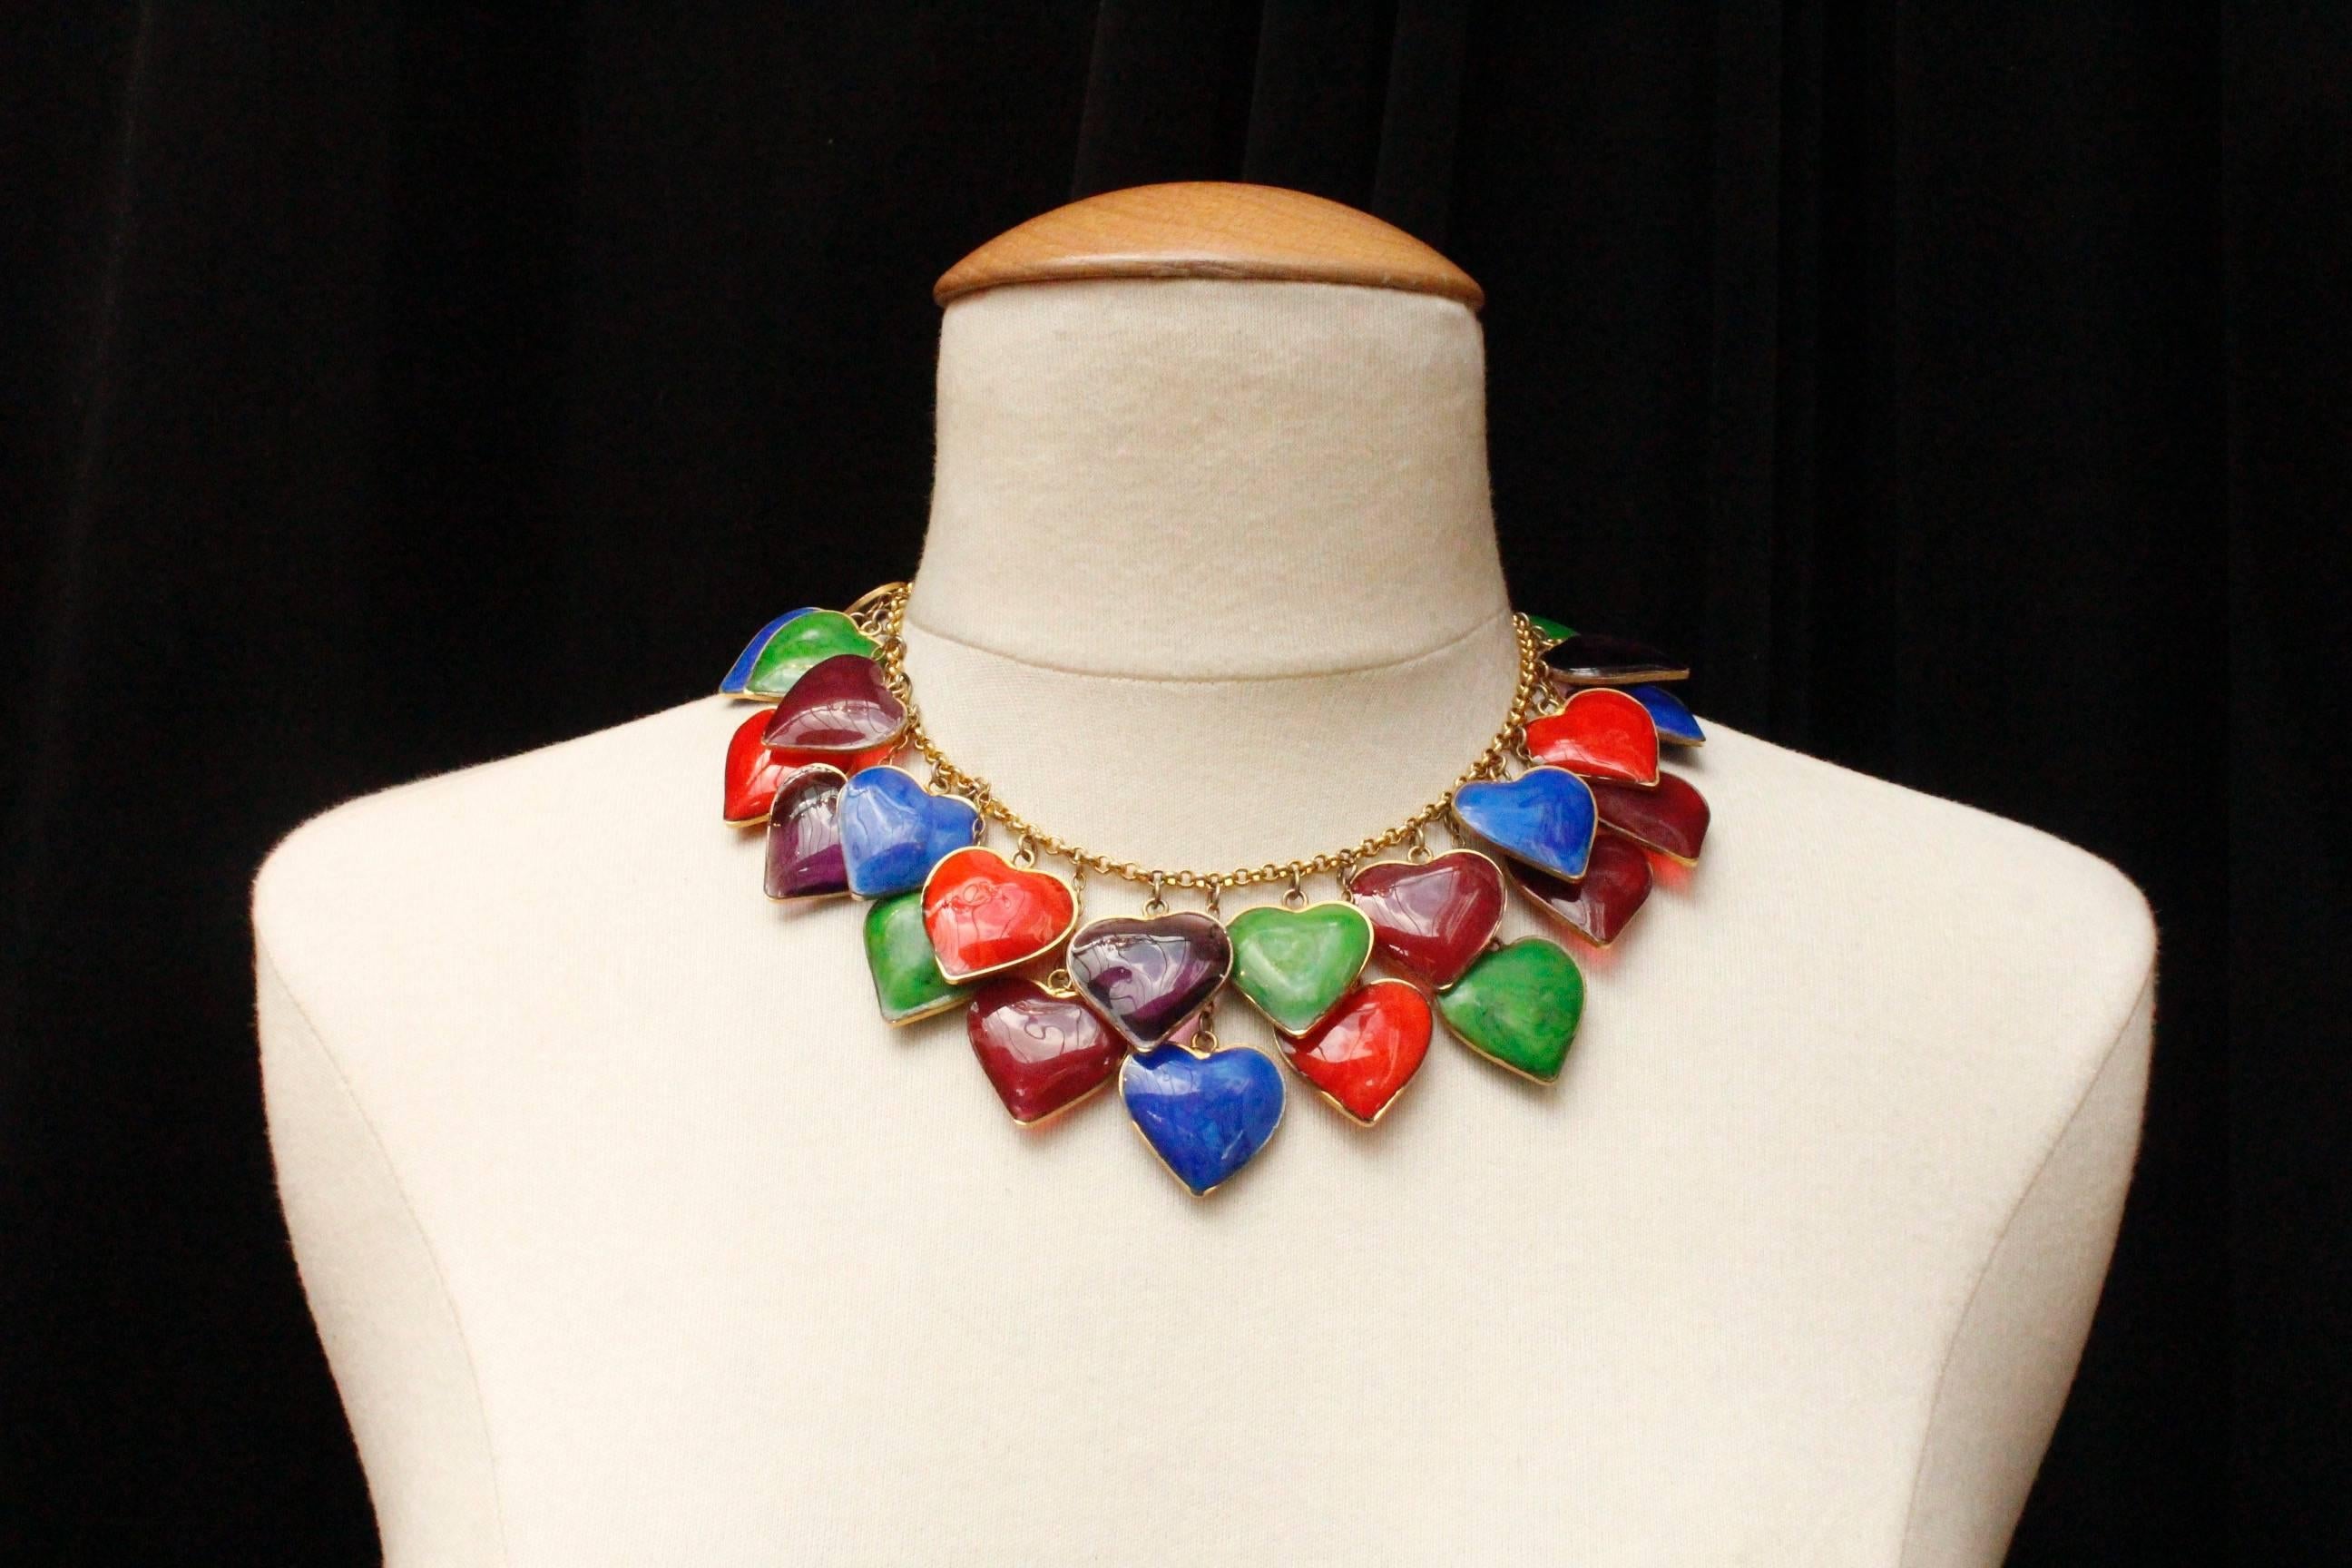 YVES SAINT LAURENT (Made in France) – Choker composed of a gilded metal chain embellished with thirty opaque or transparent glass paste hearts in green, blue, red and plum colors, set in gilded metal. The hearts are positioned in staggered rows.